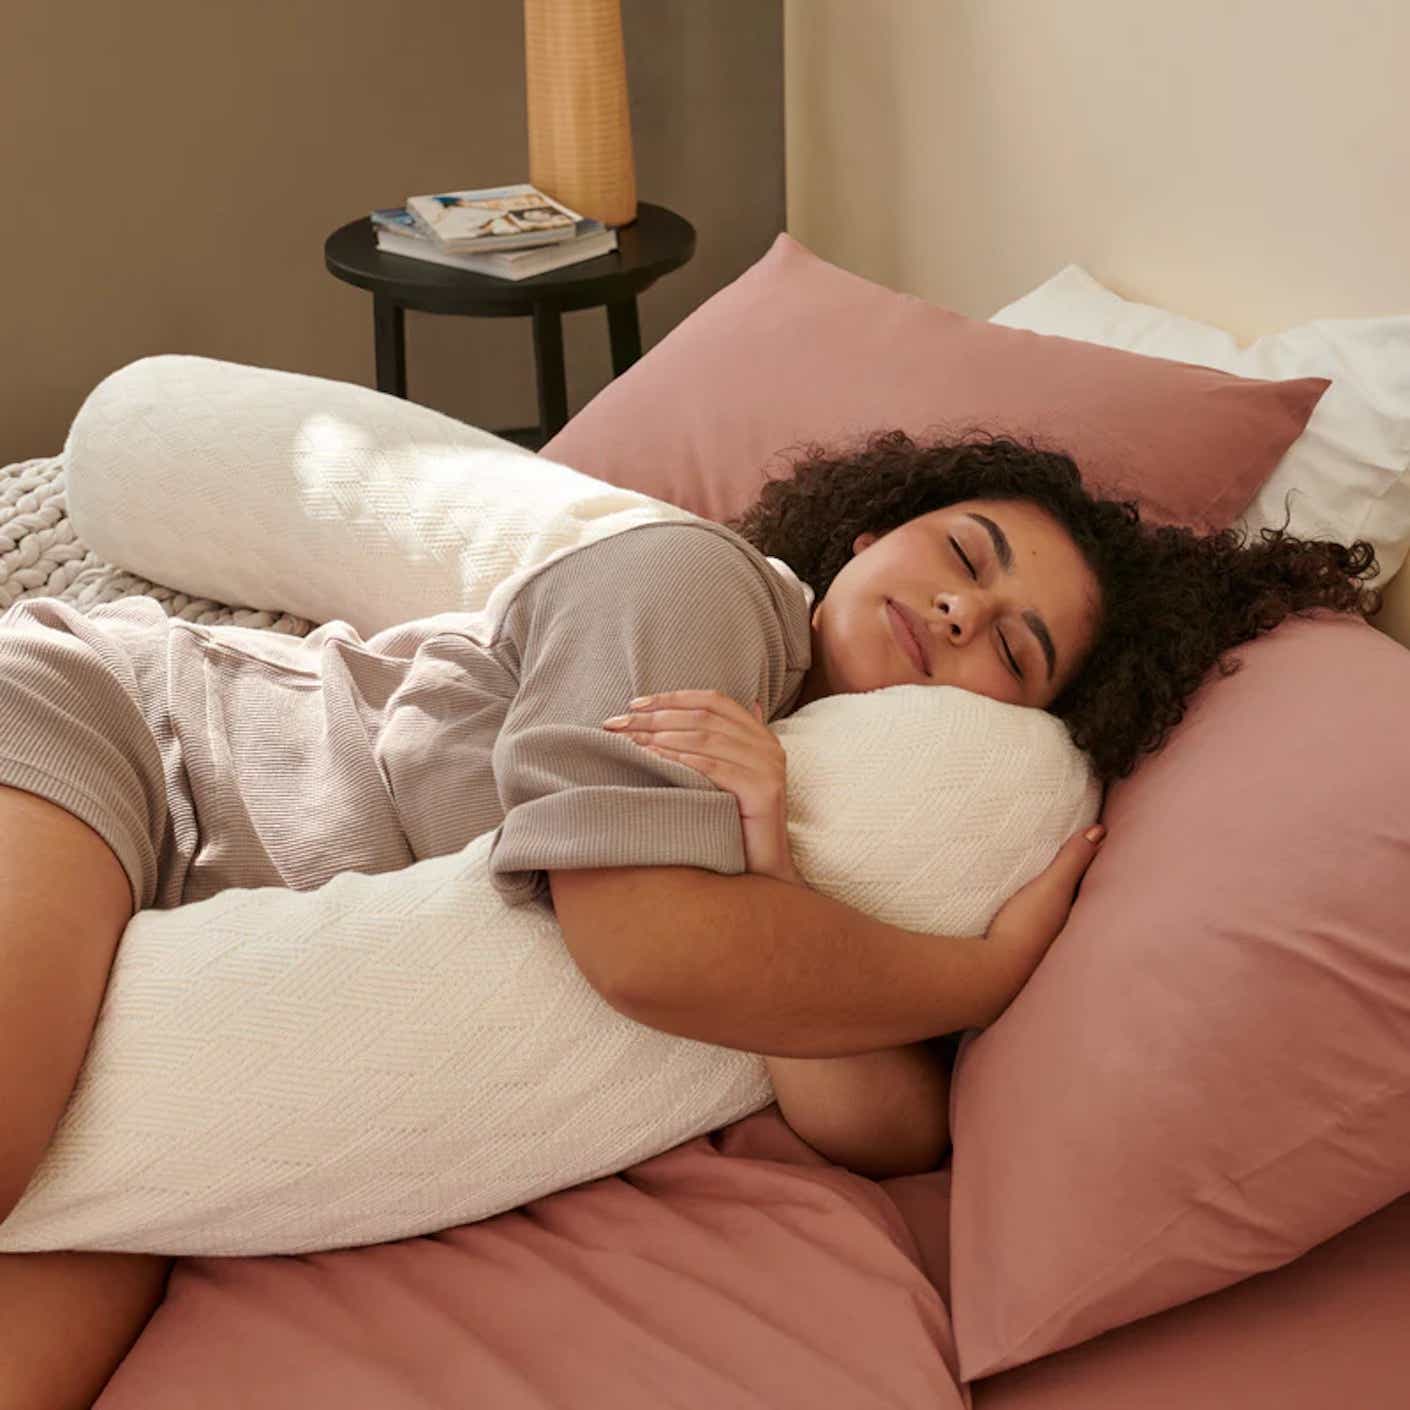 A woman blissfully hugs a body pillow in bed.